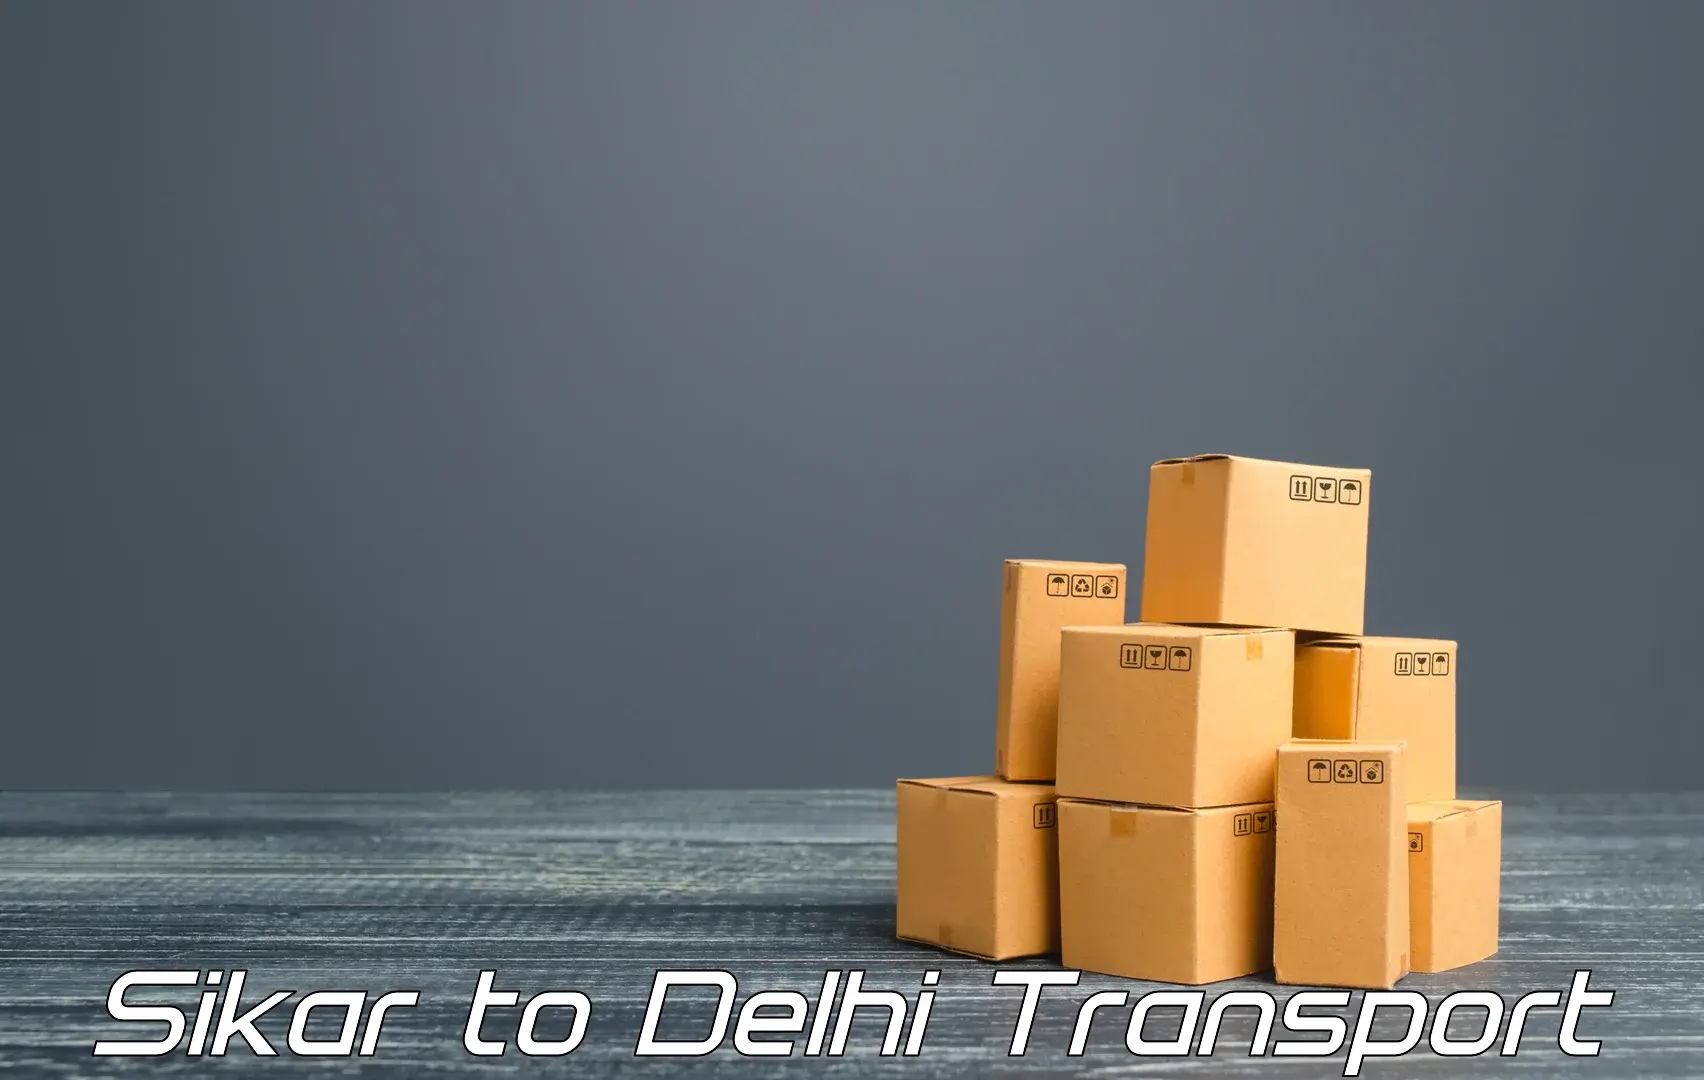 Delivery service Sikar to IIT Delhi